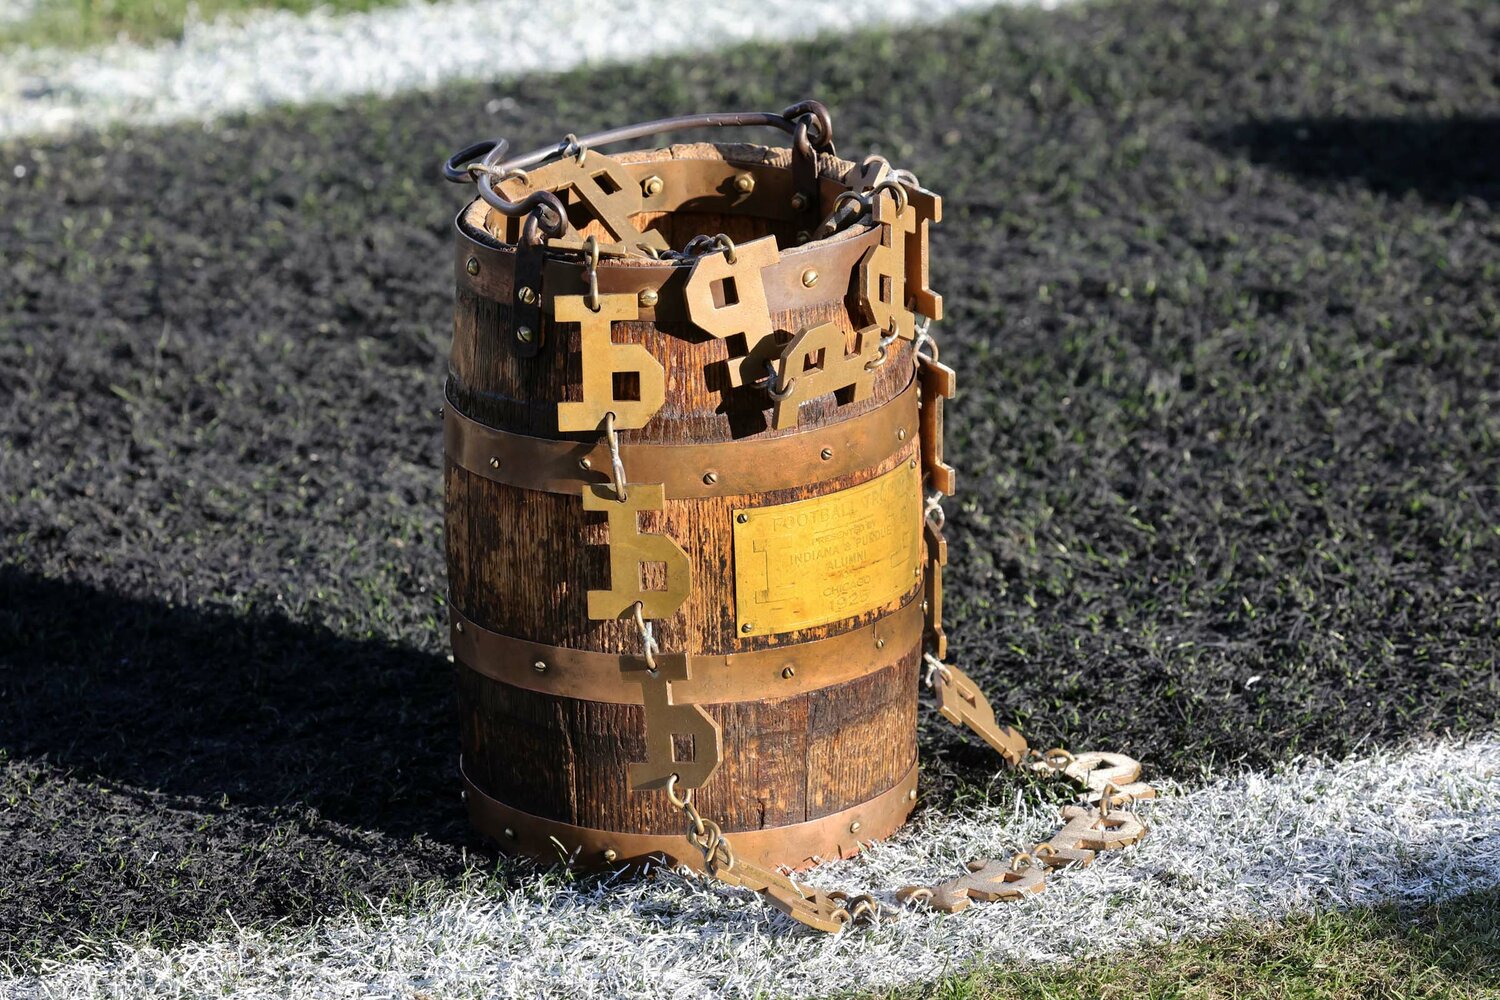 Old Oaken Bucket - waiting for the final horn to sound